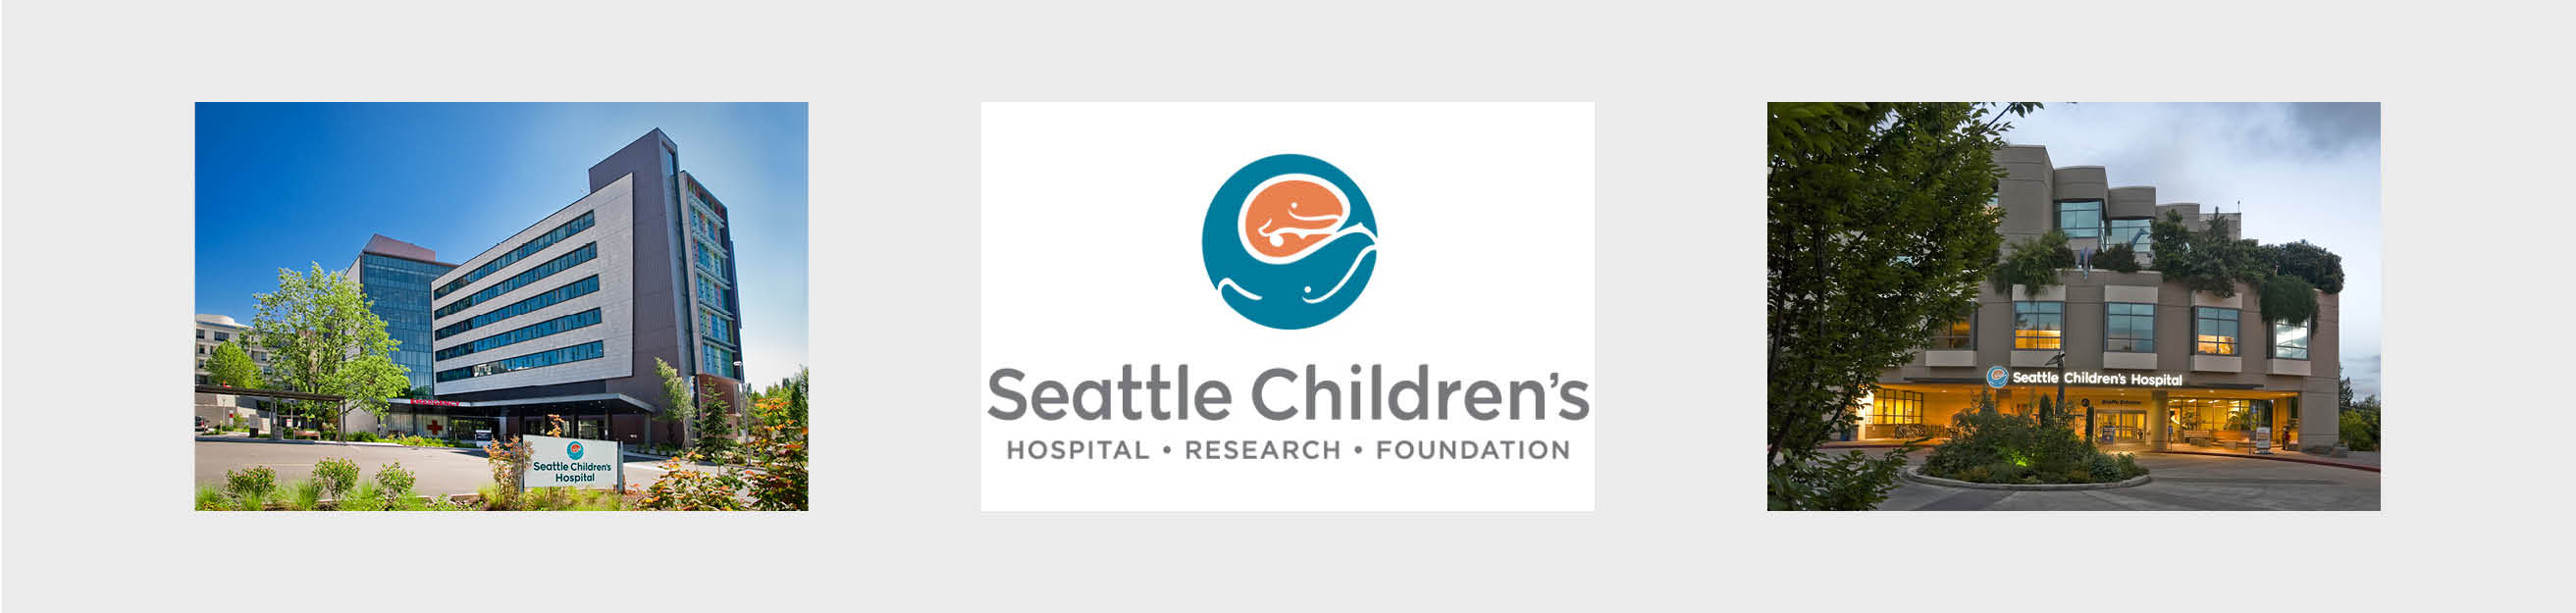 Seattle childrens Hospital images